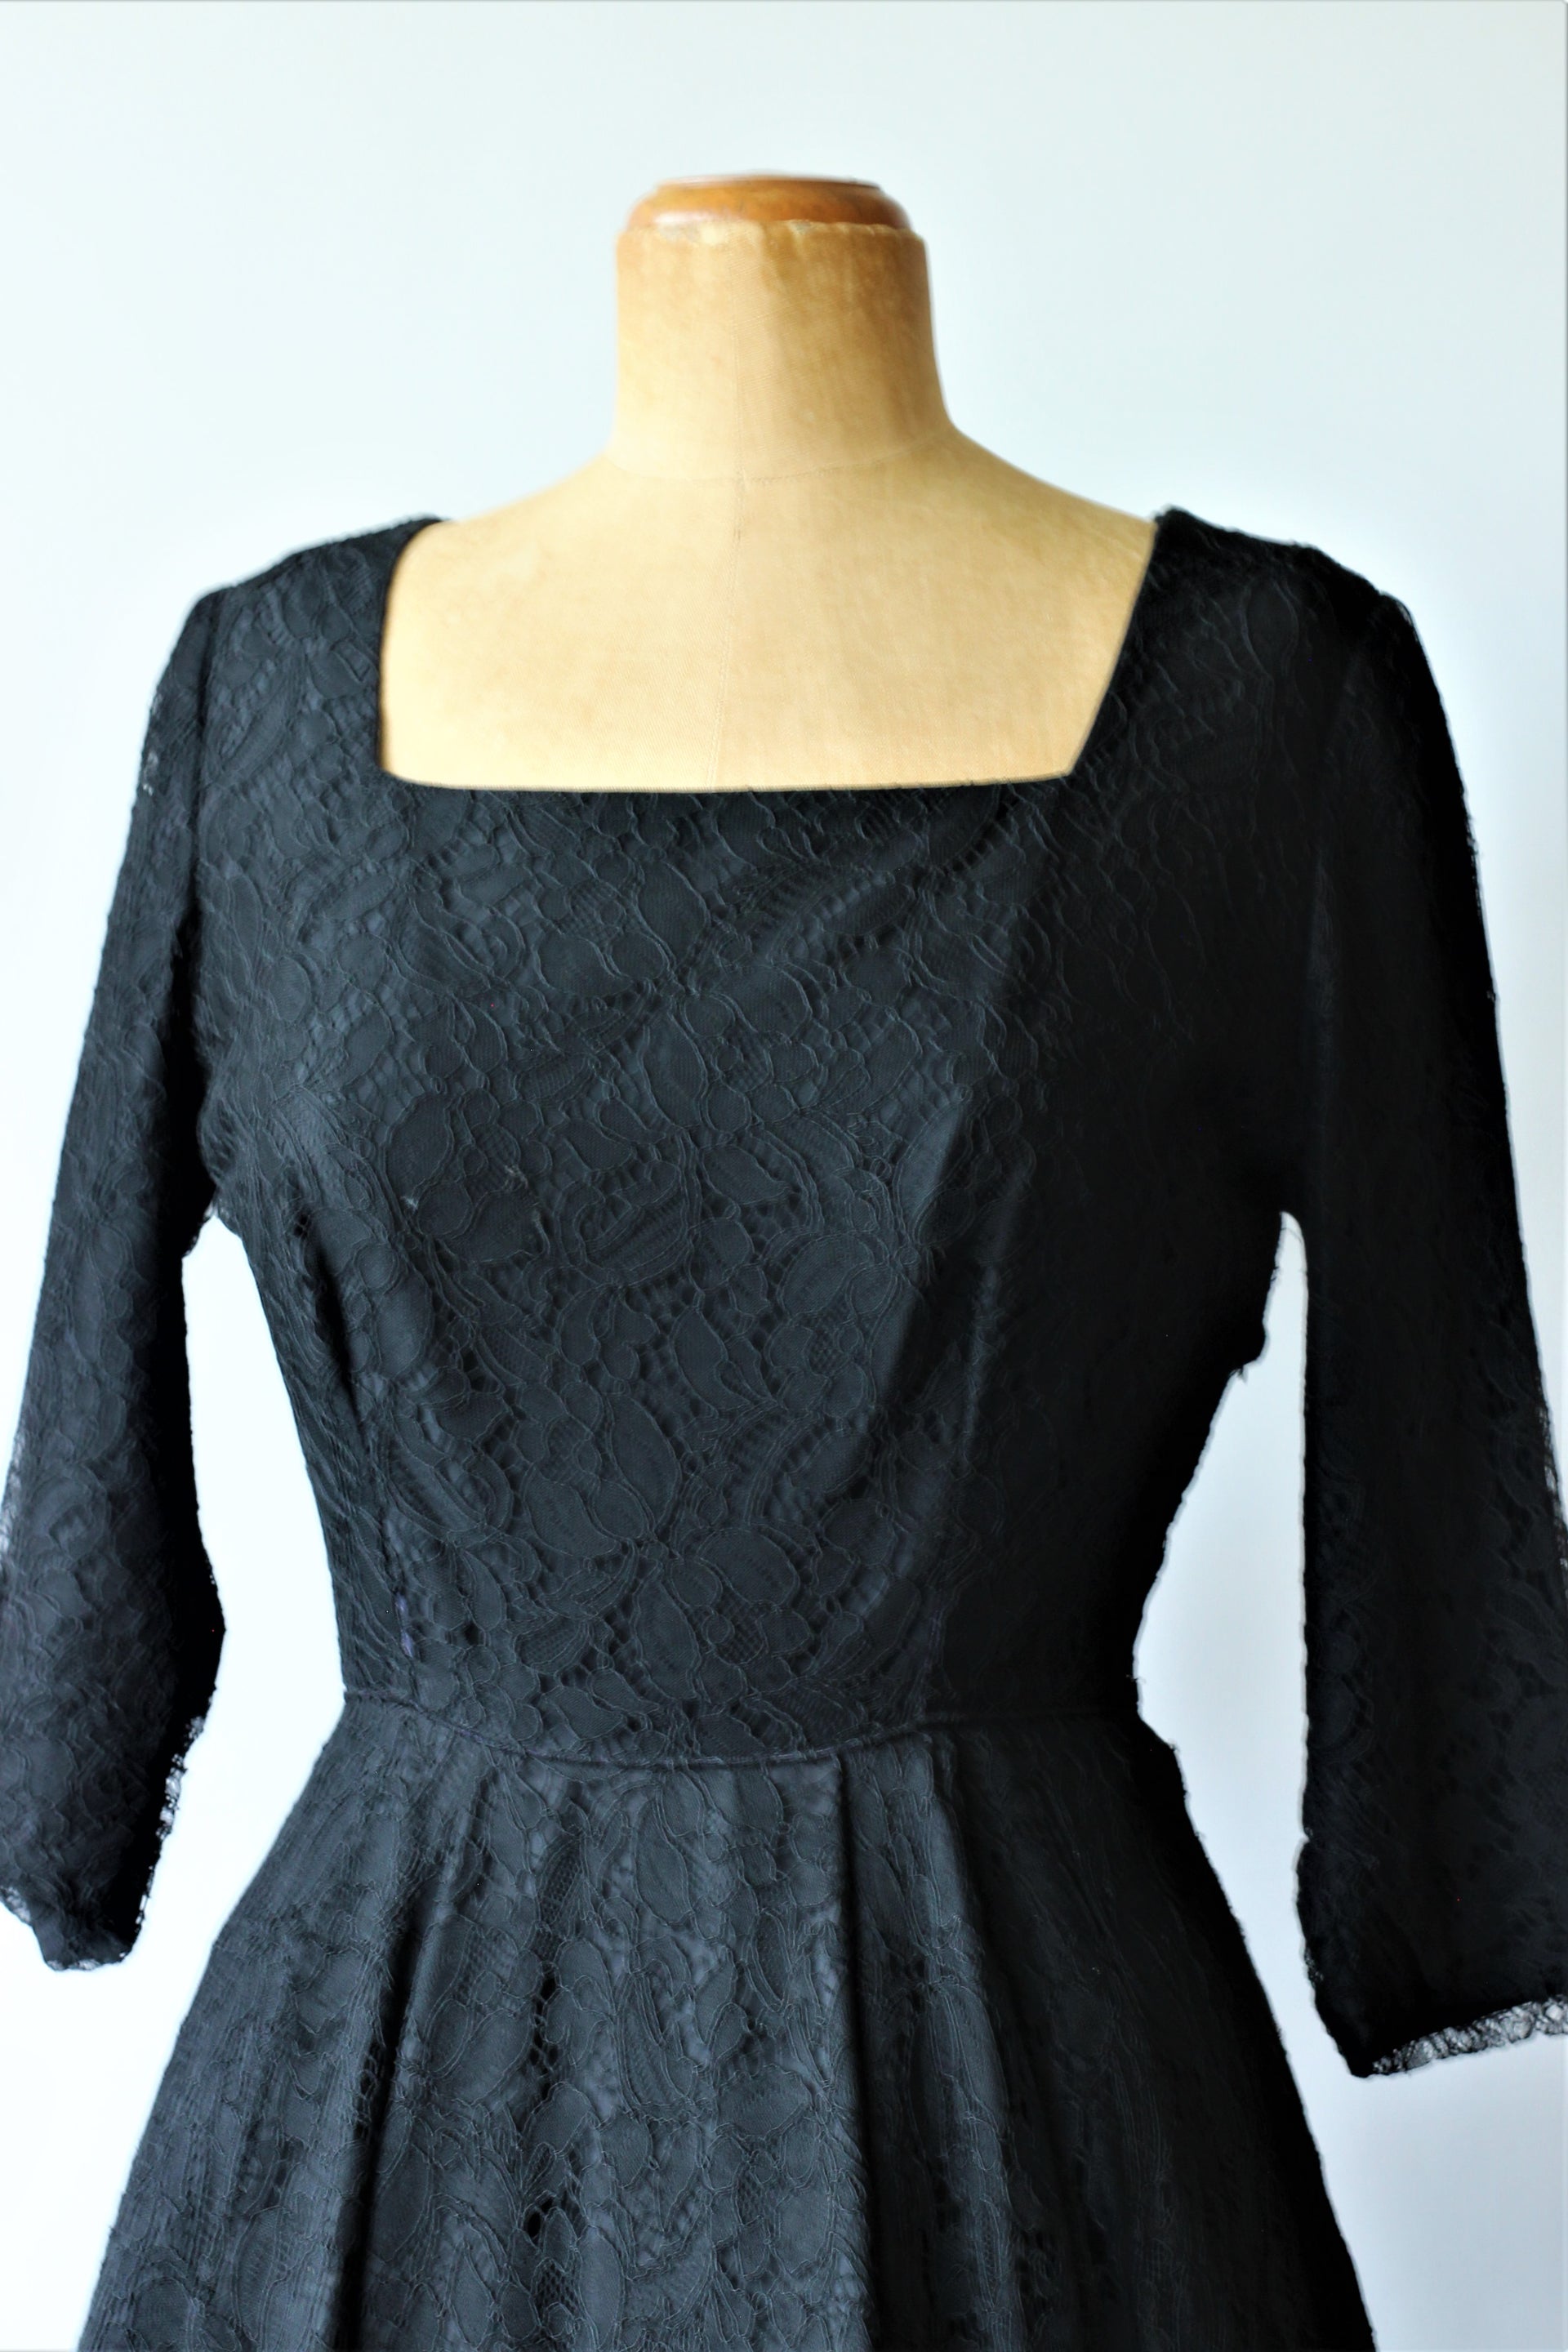 1950s Full Skirt Black Lace and Satin Dress//Size M